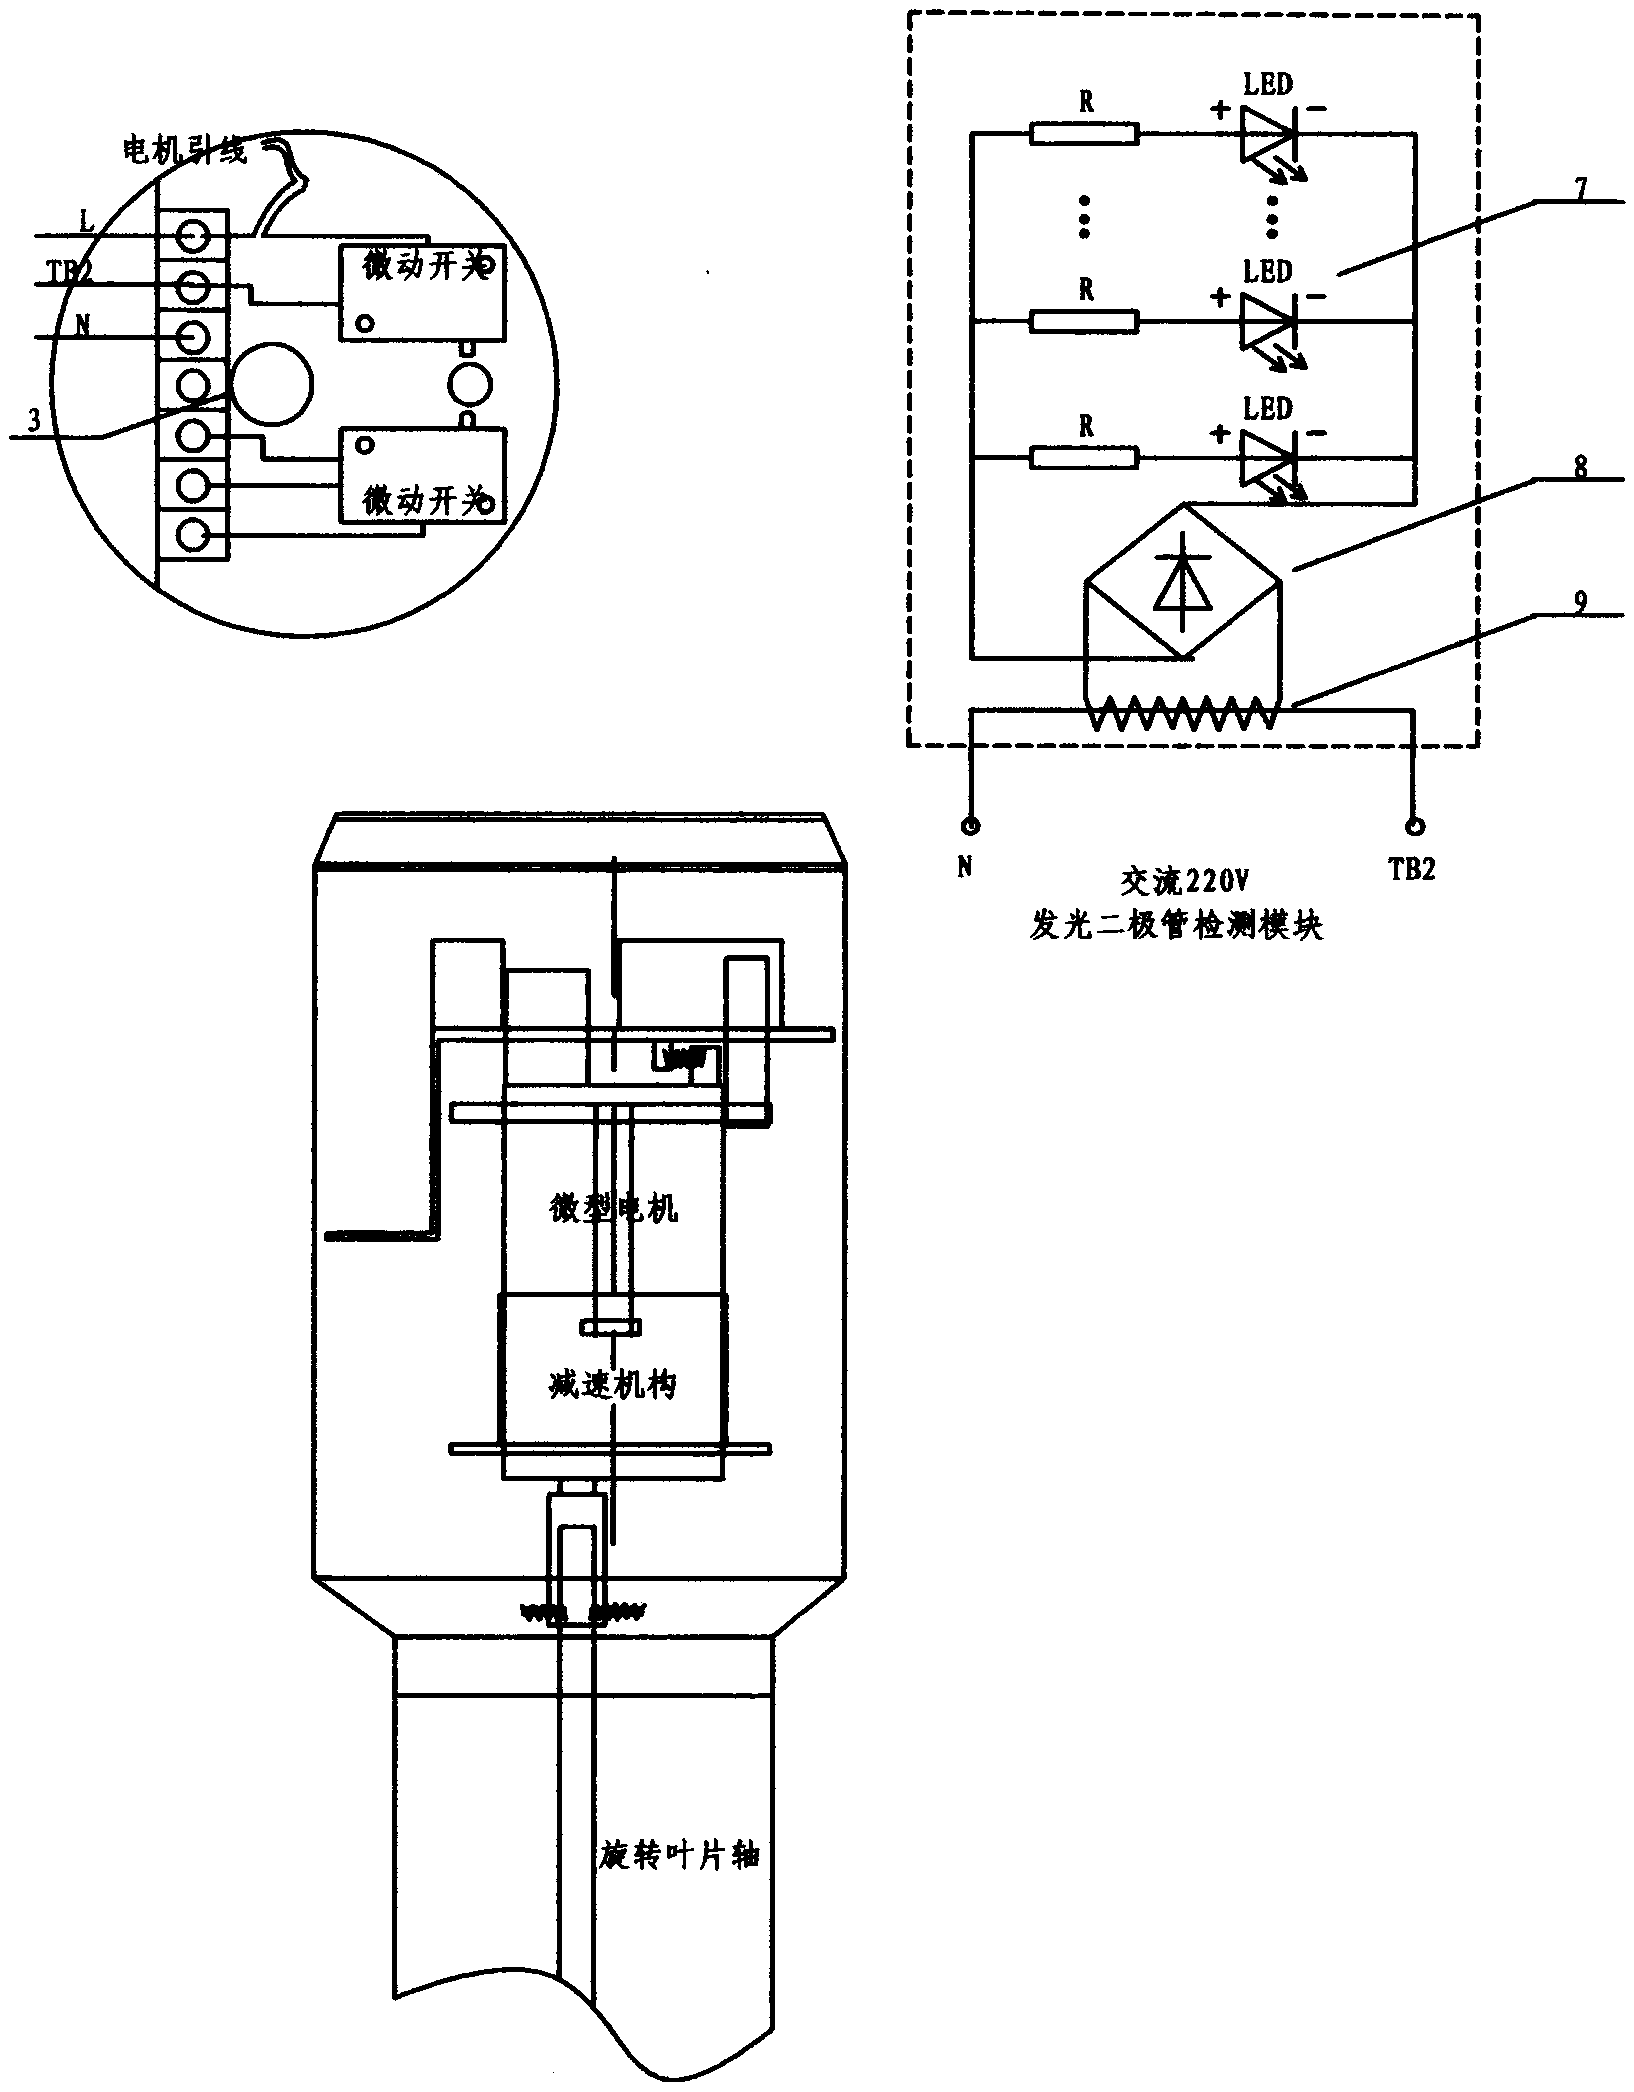 Three methods for detecting operation state of motor in rotation resisting switch